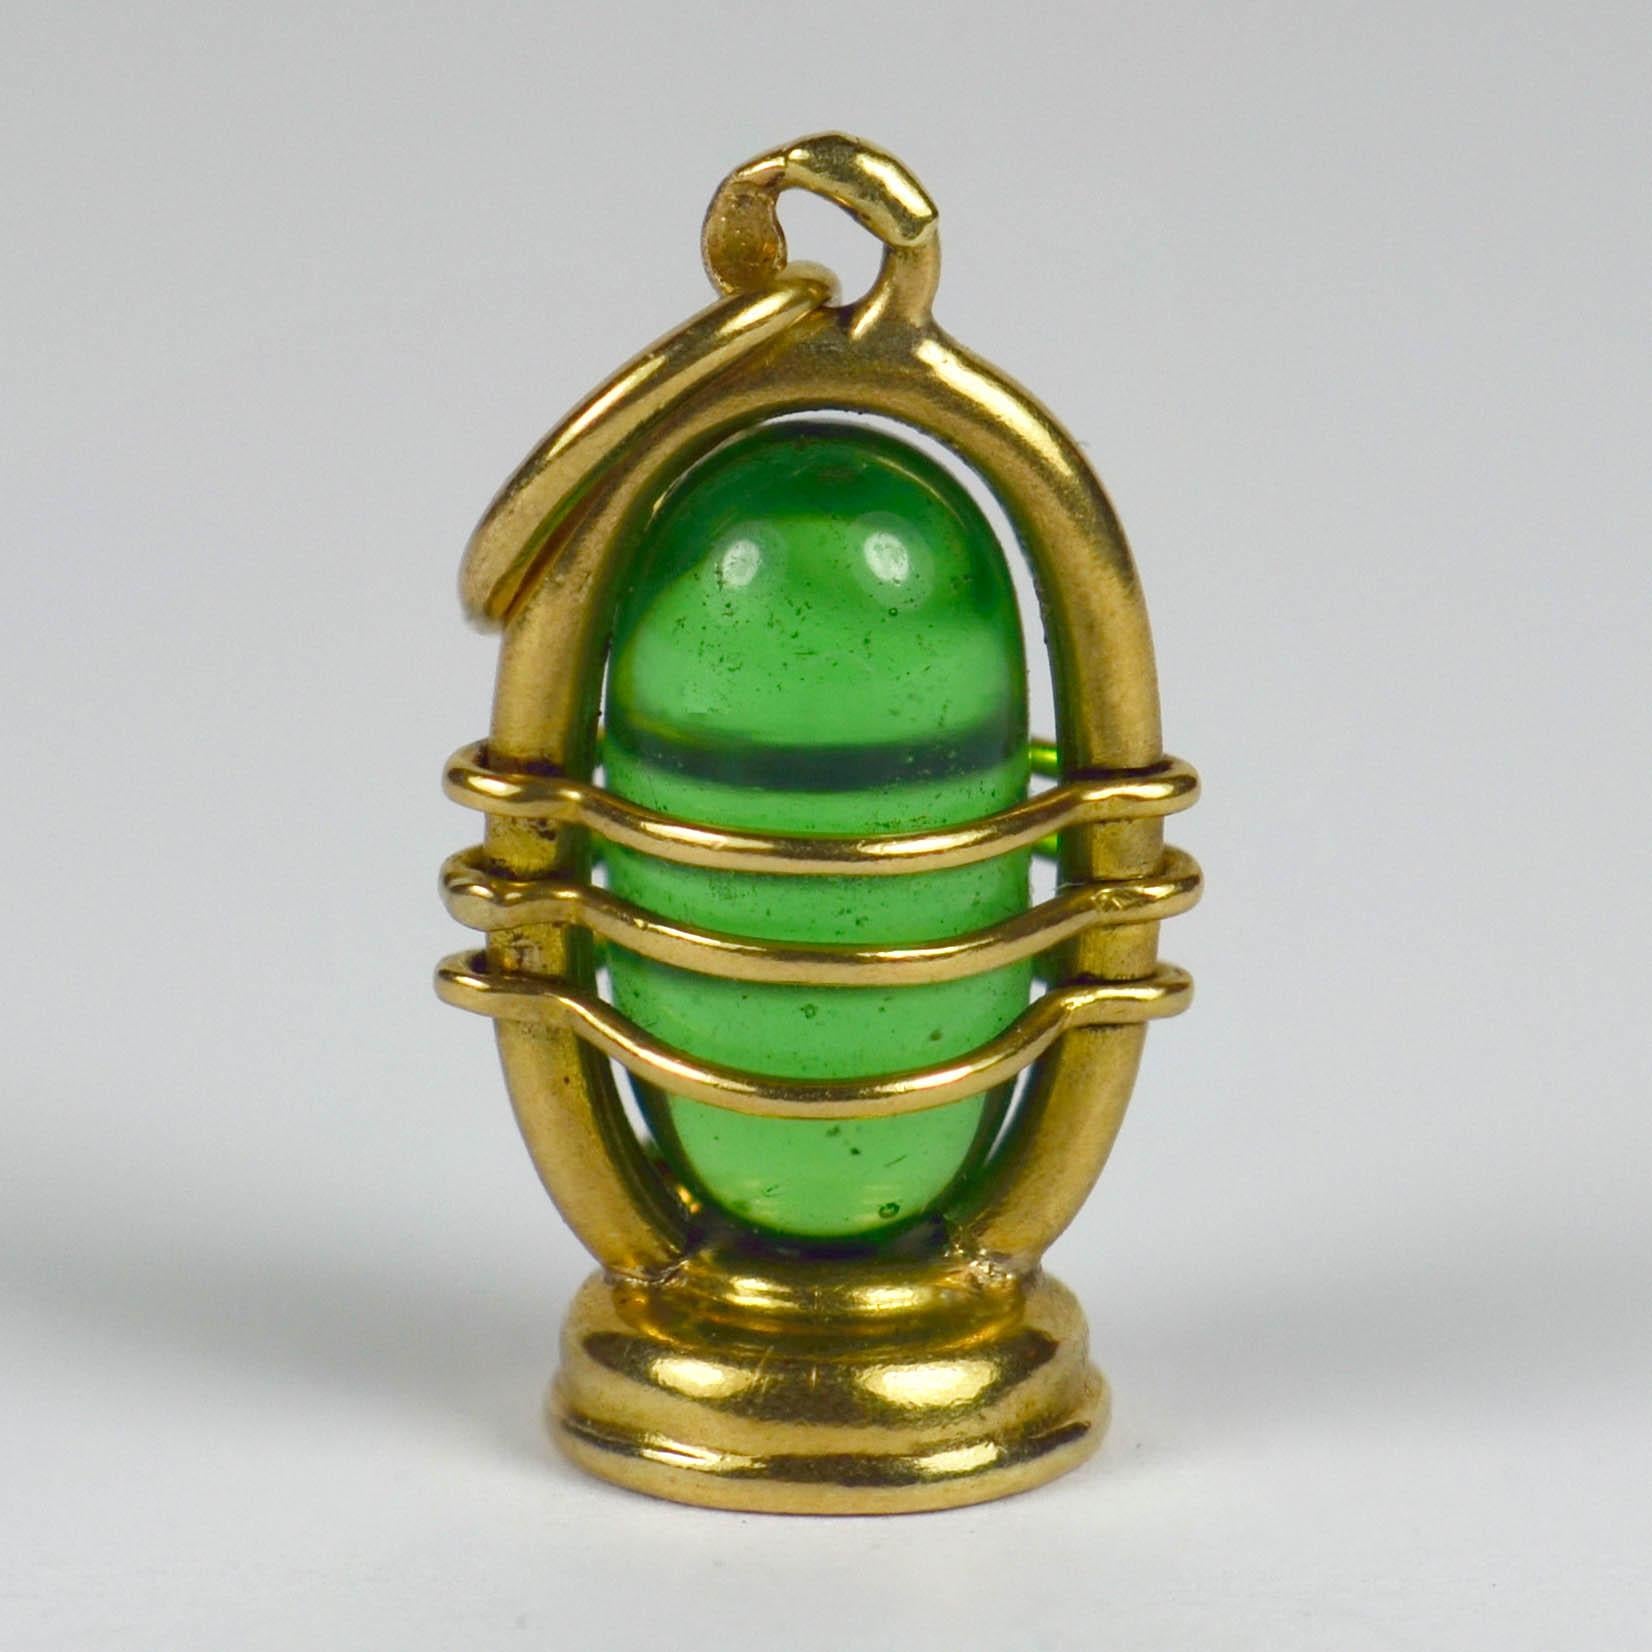 An 18 karat yellow gold charm pendant designed as an oil lantern with green glass insert. Stamped with the owl punch mark for French import of 18 karat gold.

Dimensions: 2 x 1 x 0.6 cm
Weight: 2.06 grams